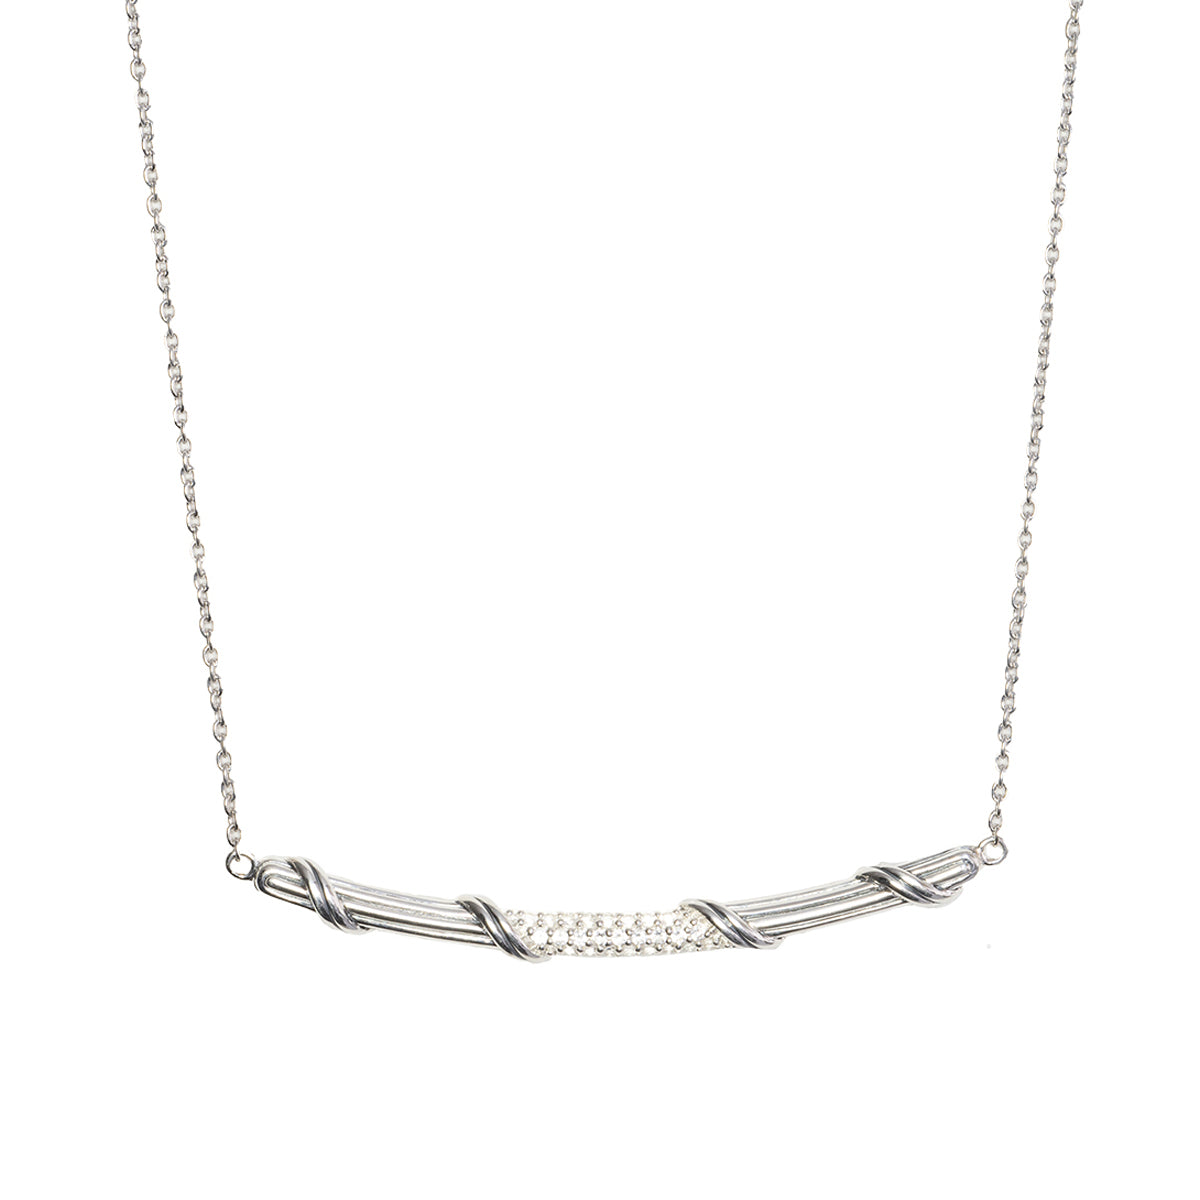 Signature Classic Bar Necklace with white topaz in sterling silver